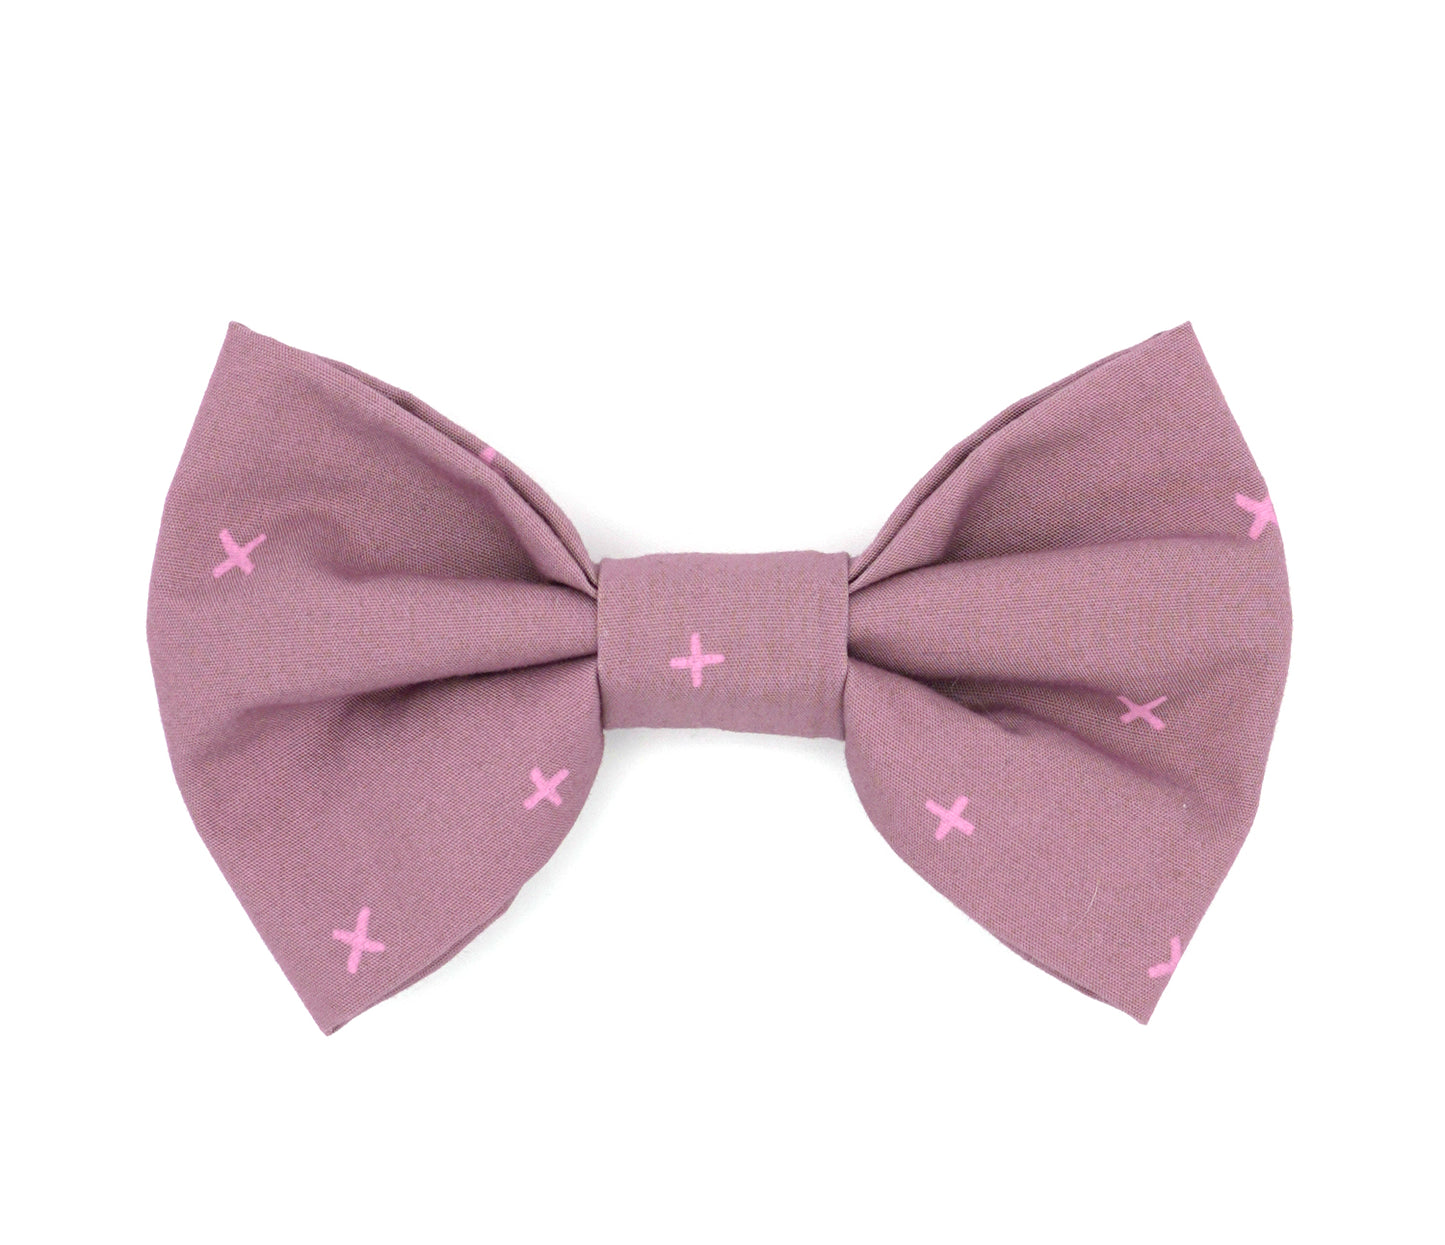 Handmade cotton bow tie for dogs (or other pets). Elastic straps on back with snaps make it easy to add to collar, harness, or leash. Lilac background with purple/pink Xs.